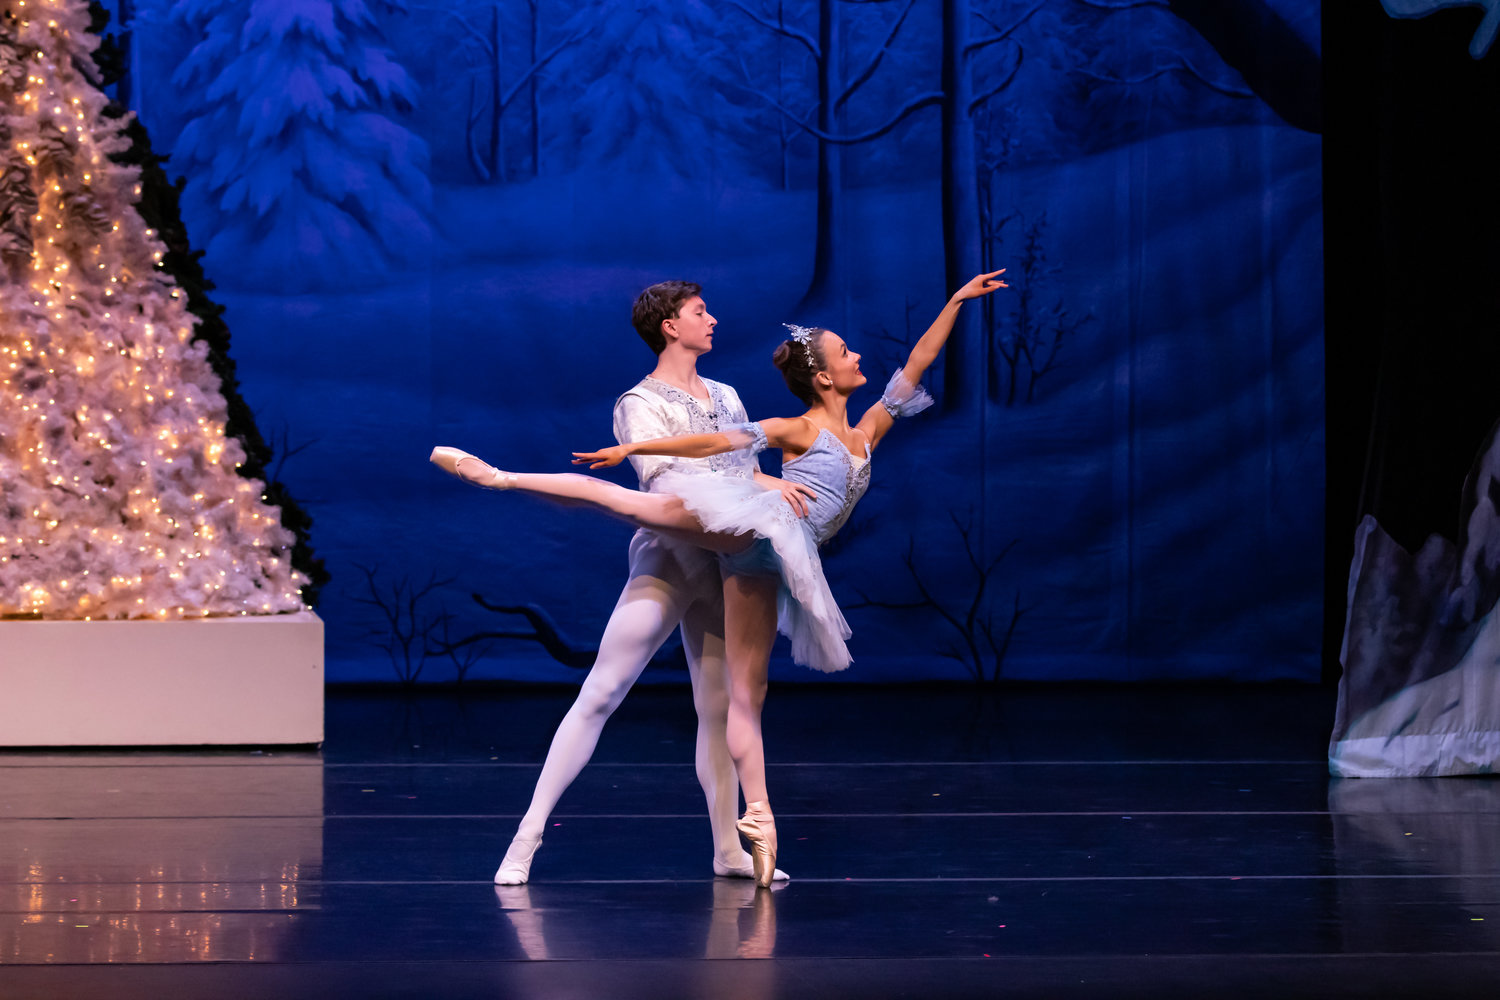 Catelyn Winders of Madison is dancing the lead role of Clara in Mississippi Metropolitan Ballet’s rendition of “The Nutcracker.”